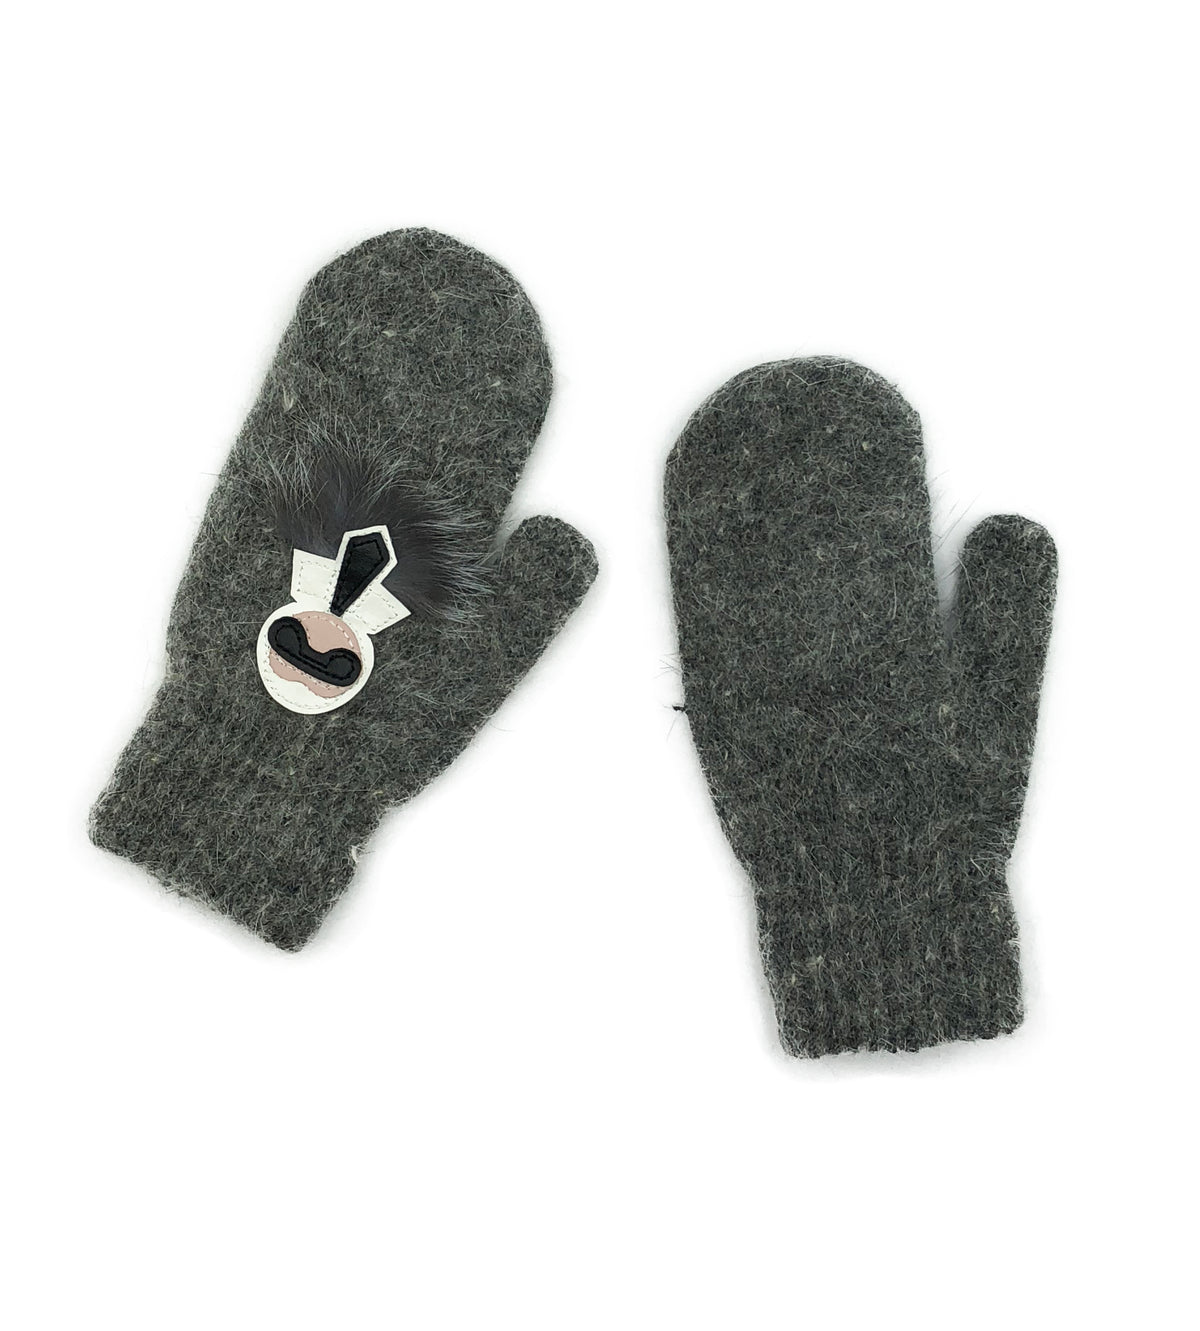 Wool Mittens with Winter Design - paulamariecollection